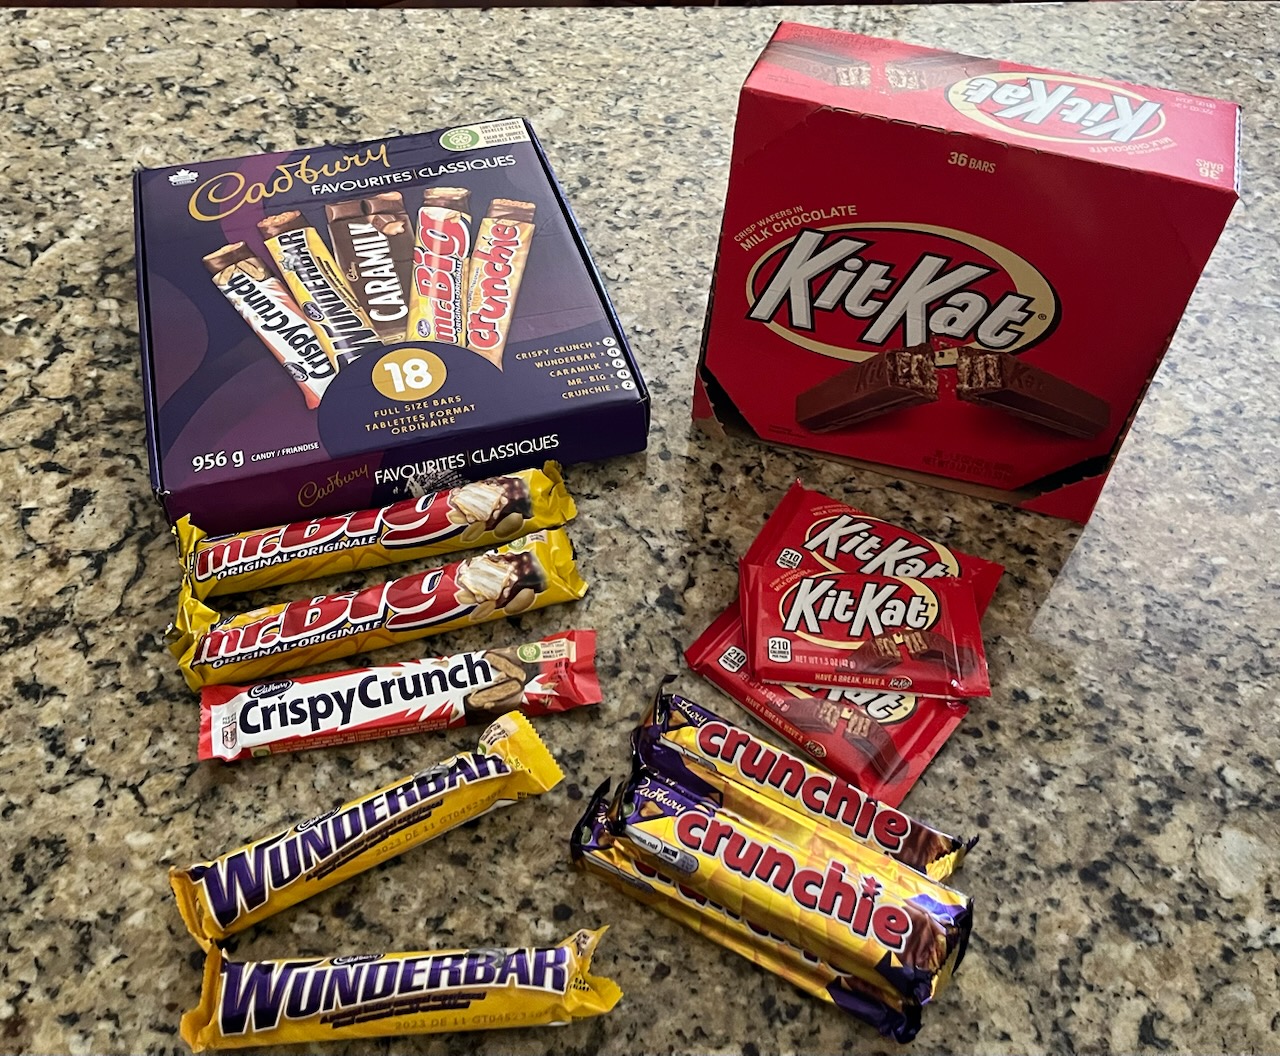 A variety of Canadian chocolate bars